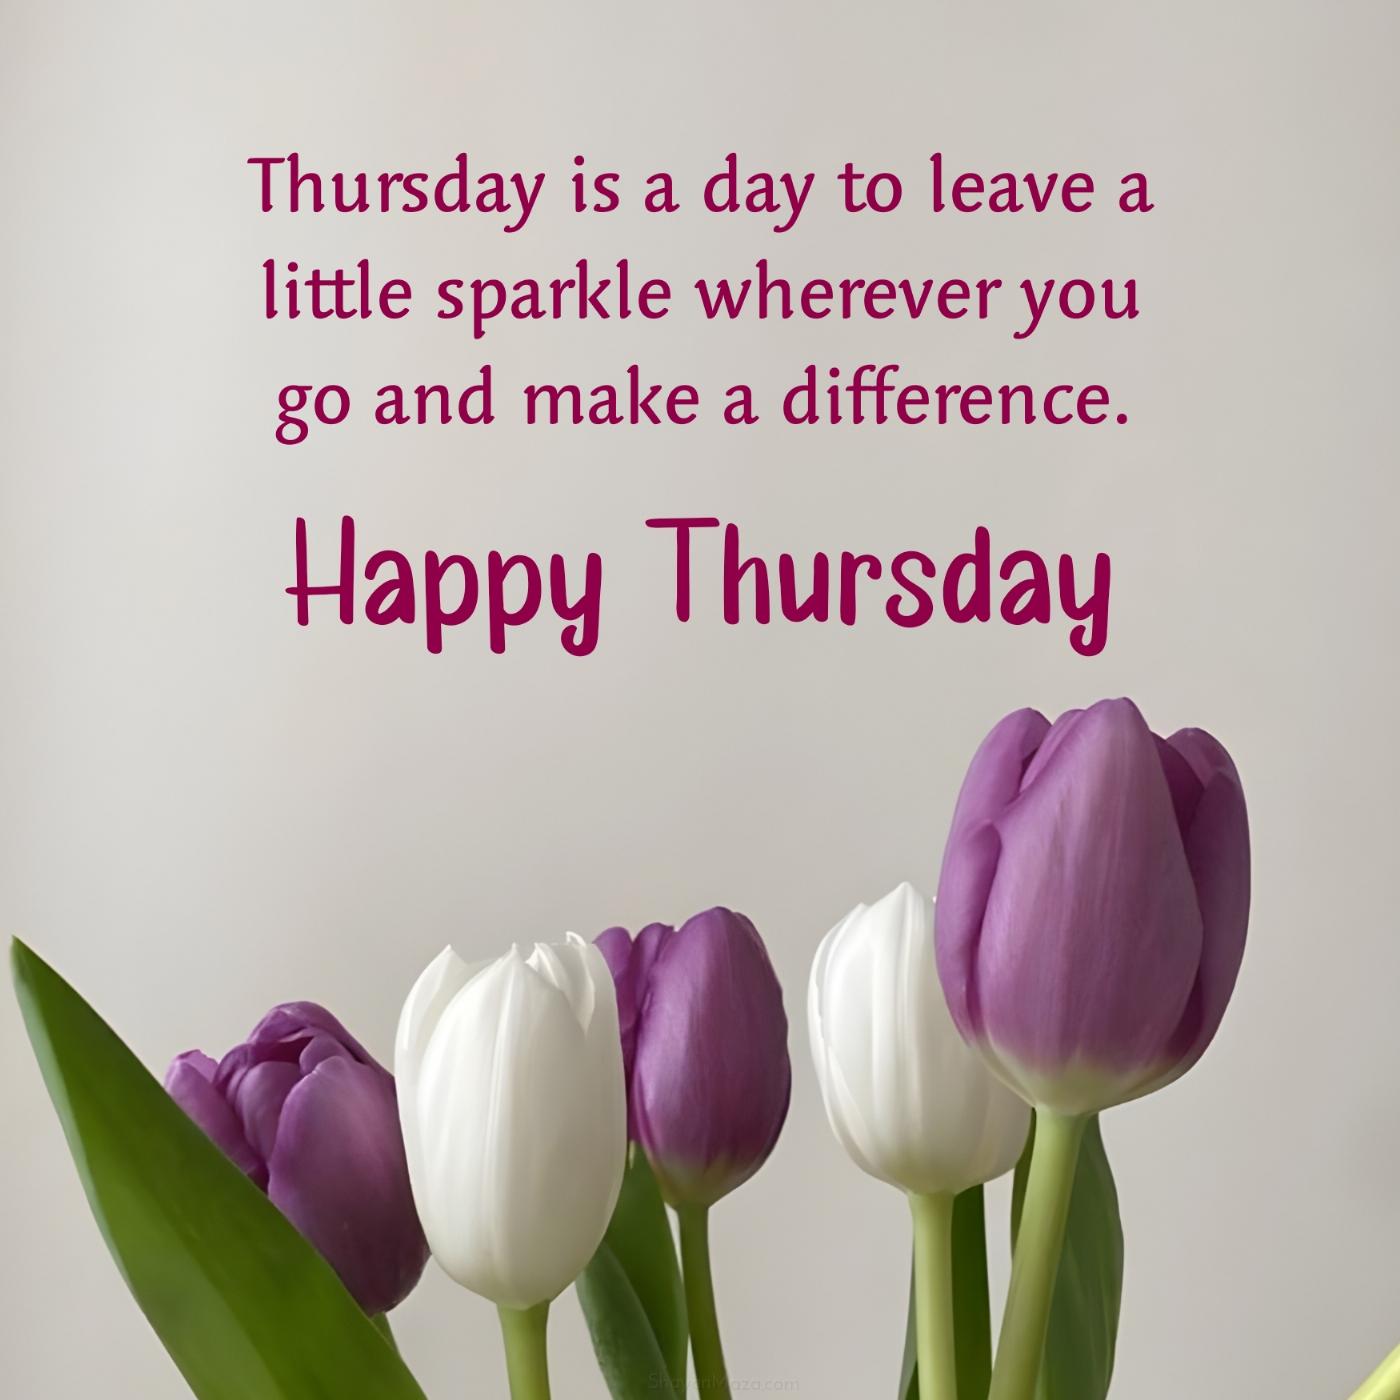 Thursday is a day to leave a little sparkle wherever you go